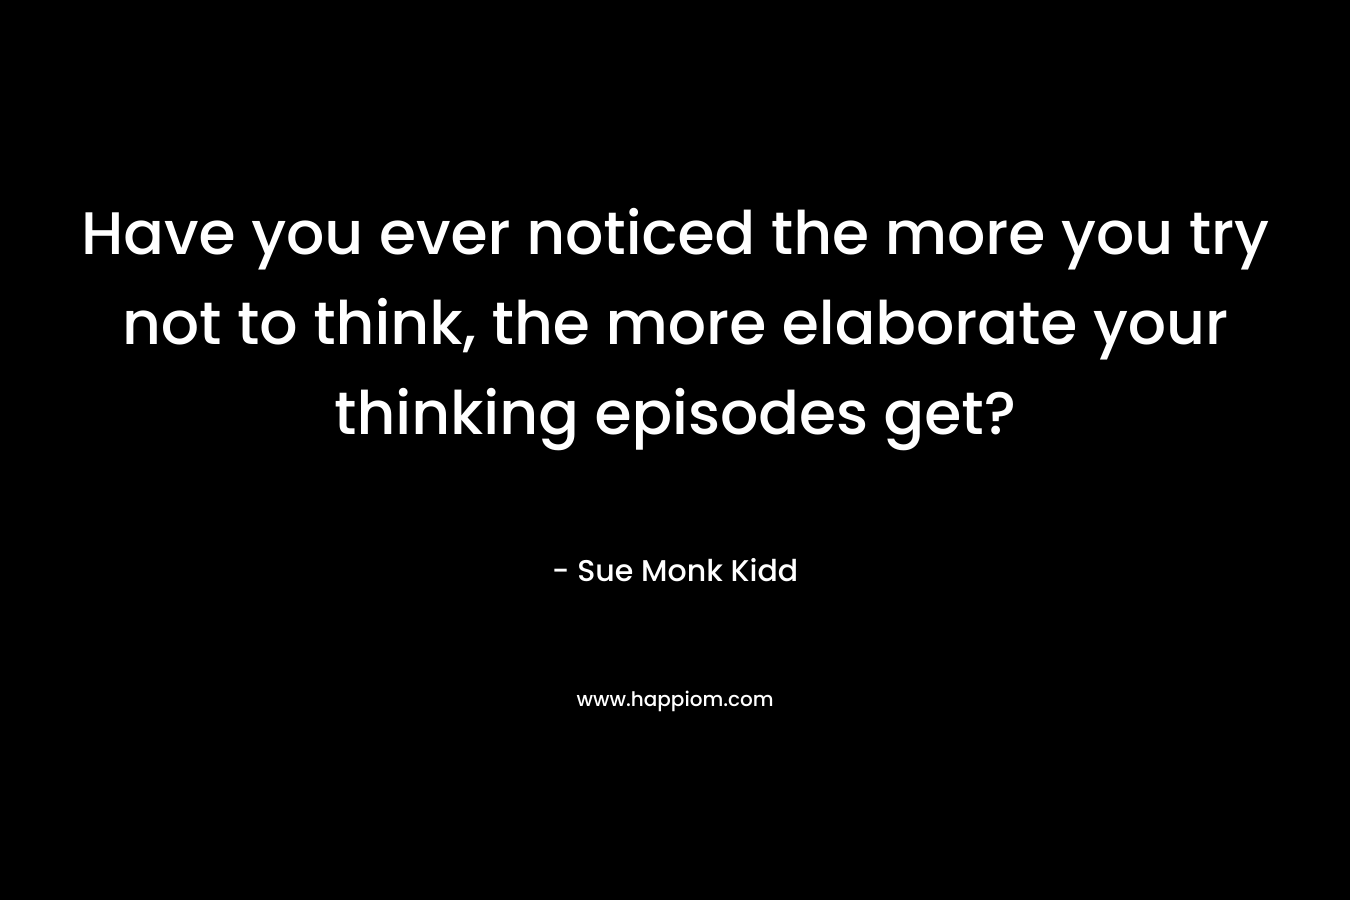 Have you ever noticed the more you try not to think, the more elaborate your thinking episodes get? – Sue Monk Kidd